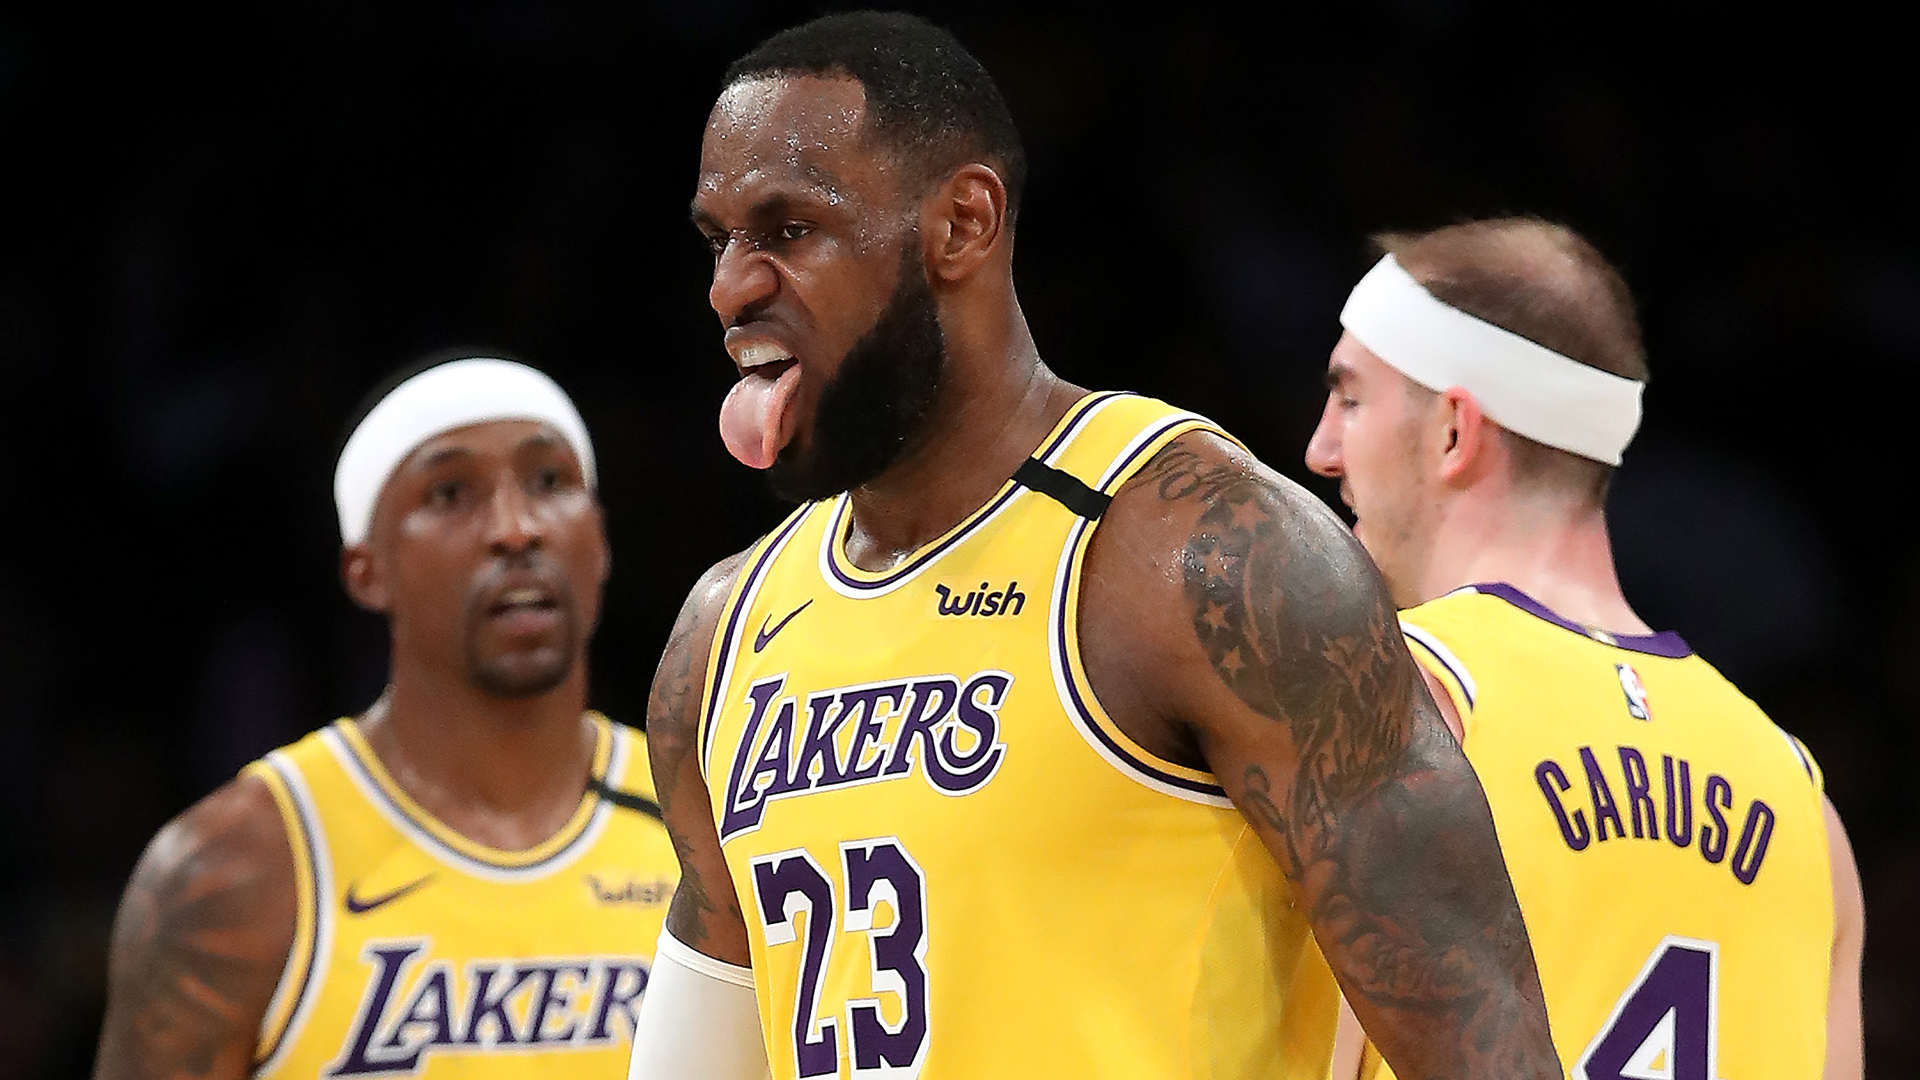 The Los Angeles Lakers cruised to a ninth straight win to continue their fine form in the NBA.